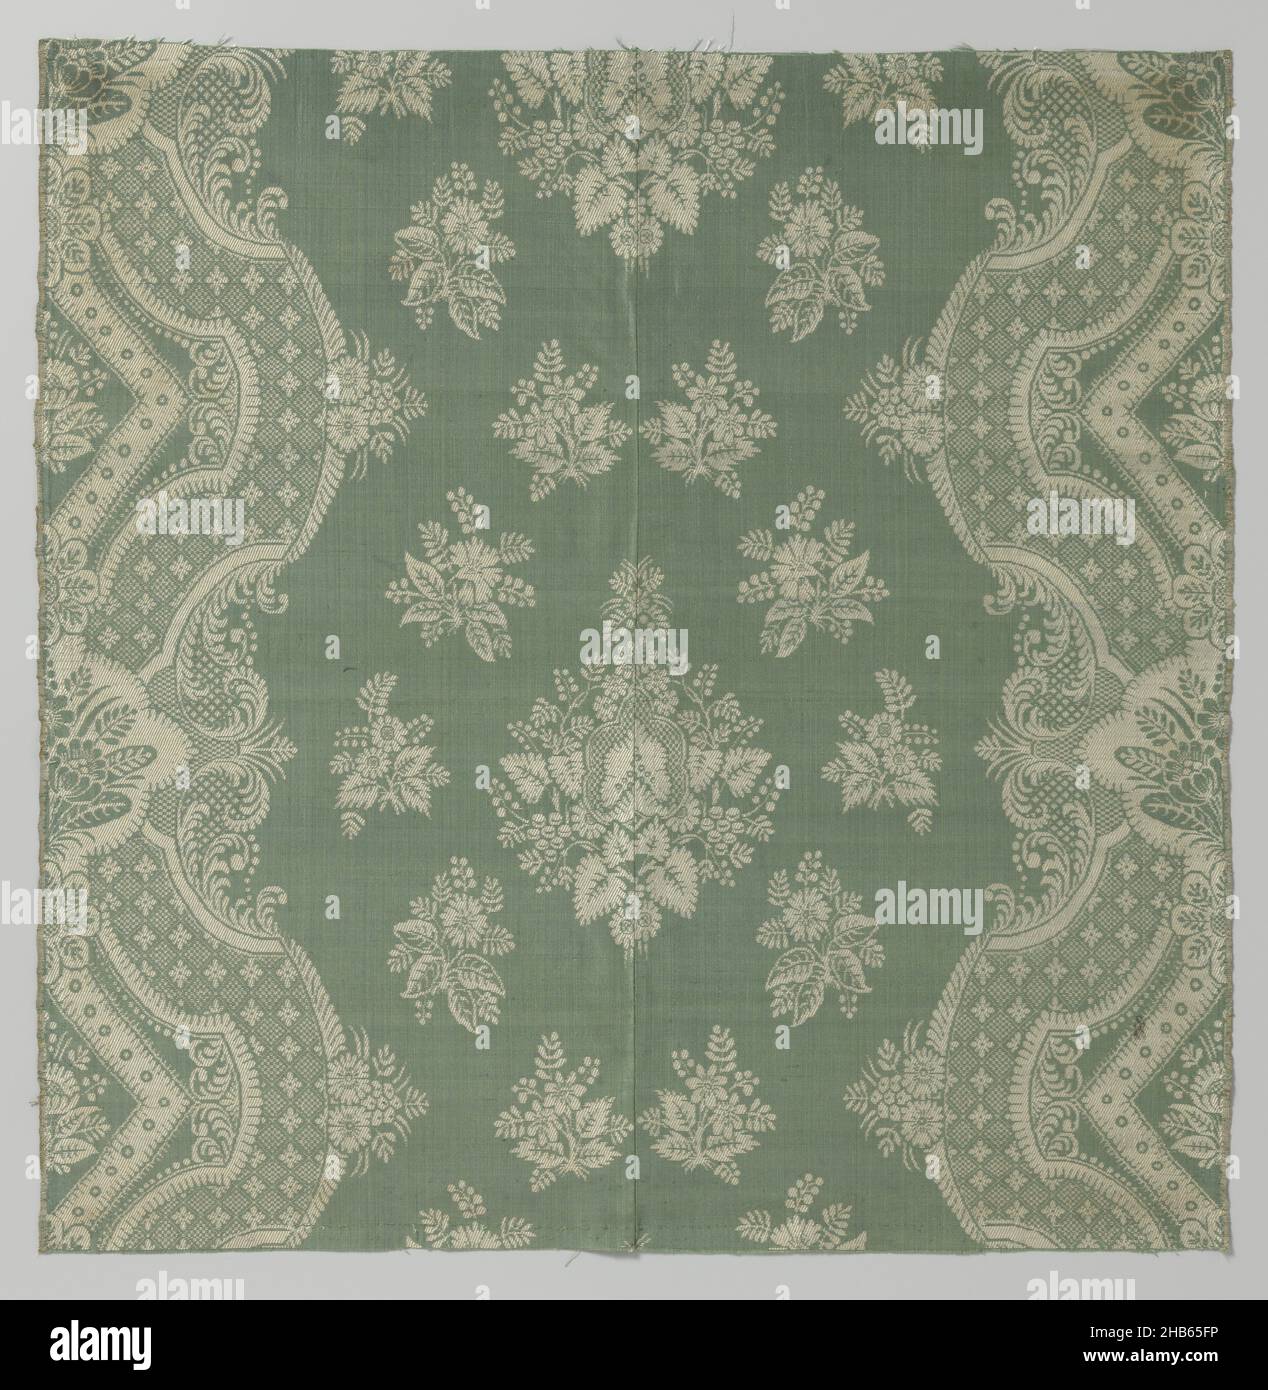 Two silk fabric fragments sewn together, Silk fabric consisting of a green warp with ditto weft for the fond (fine rips) and a white warp and weft for the pattern (twill). The pattern consists of a small diamond-shaped bouquet of leaves, around which are loose flower columns like a wreath, surrounded by wide, volute-shaped agrement bands., France, c. 1690 - c. 1710, ketting en inslag: silk, twill, height 50.6 cm × width 50.2 cmheight 29.5 cmwidth 0.3 cm Stock Photo